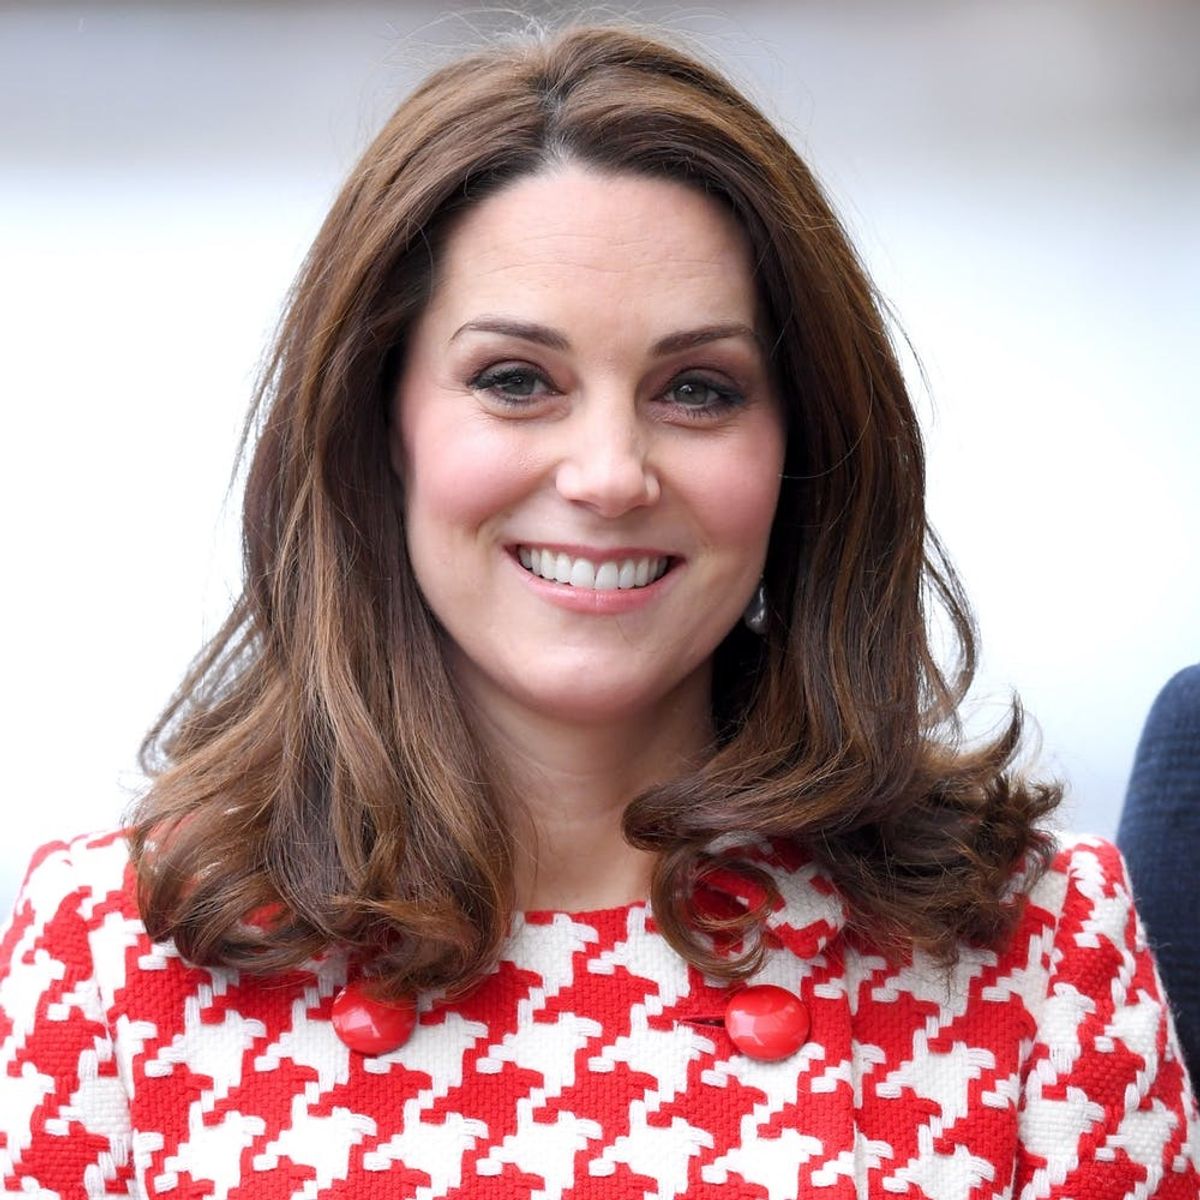 Kate Middleton Twinned With the Late Princess Diana in This Houndstooth Coat